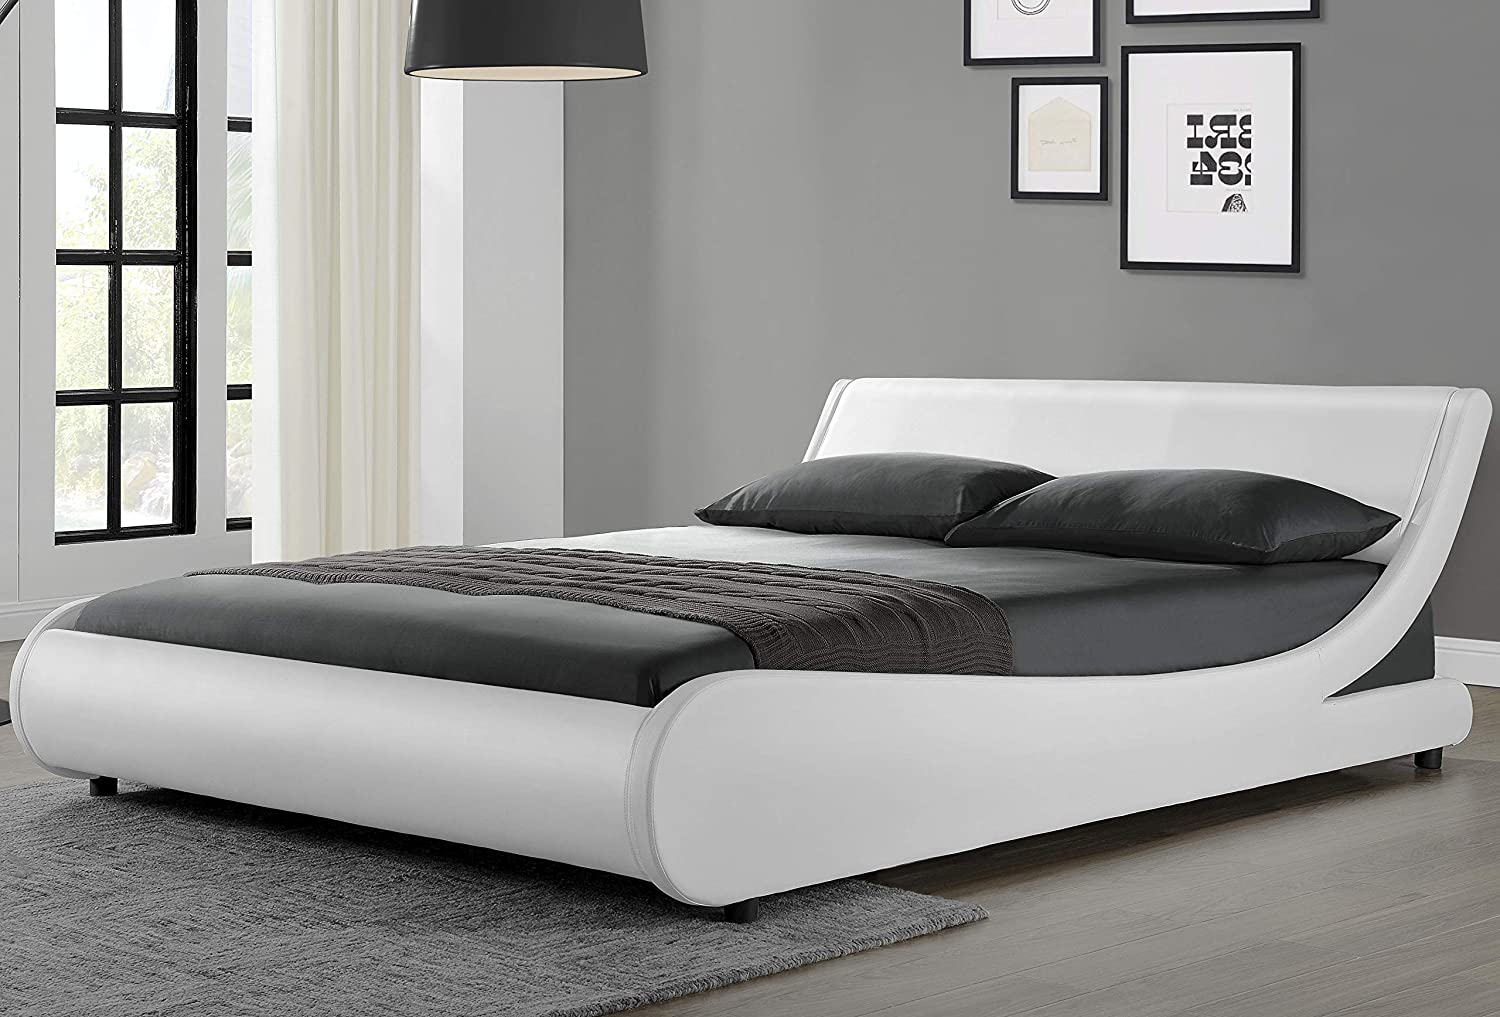 platform bed with lip to hold mattress